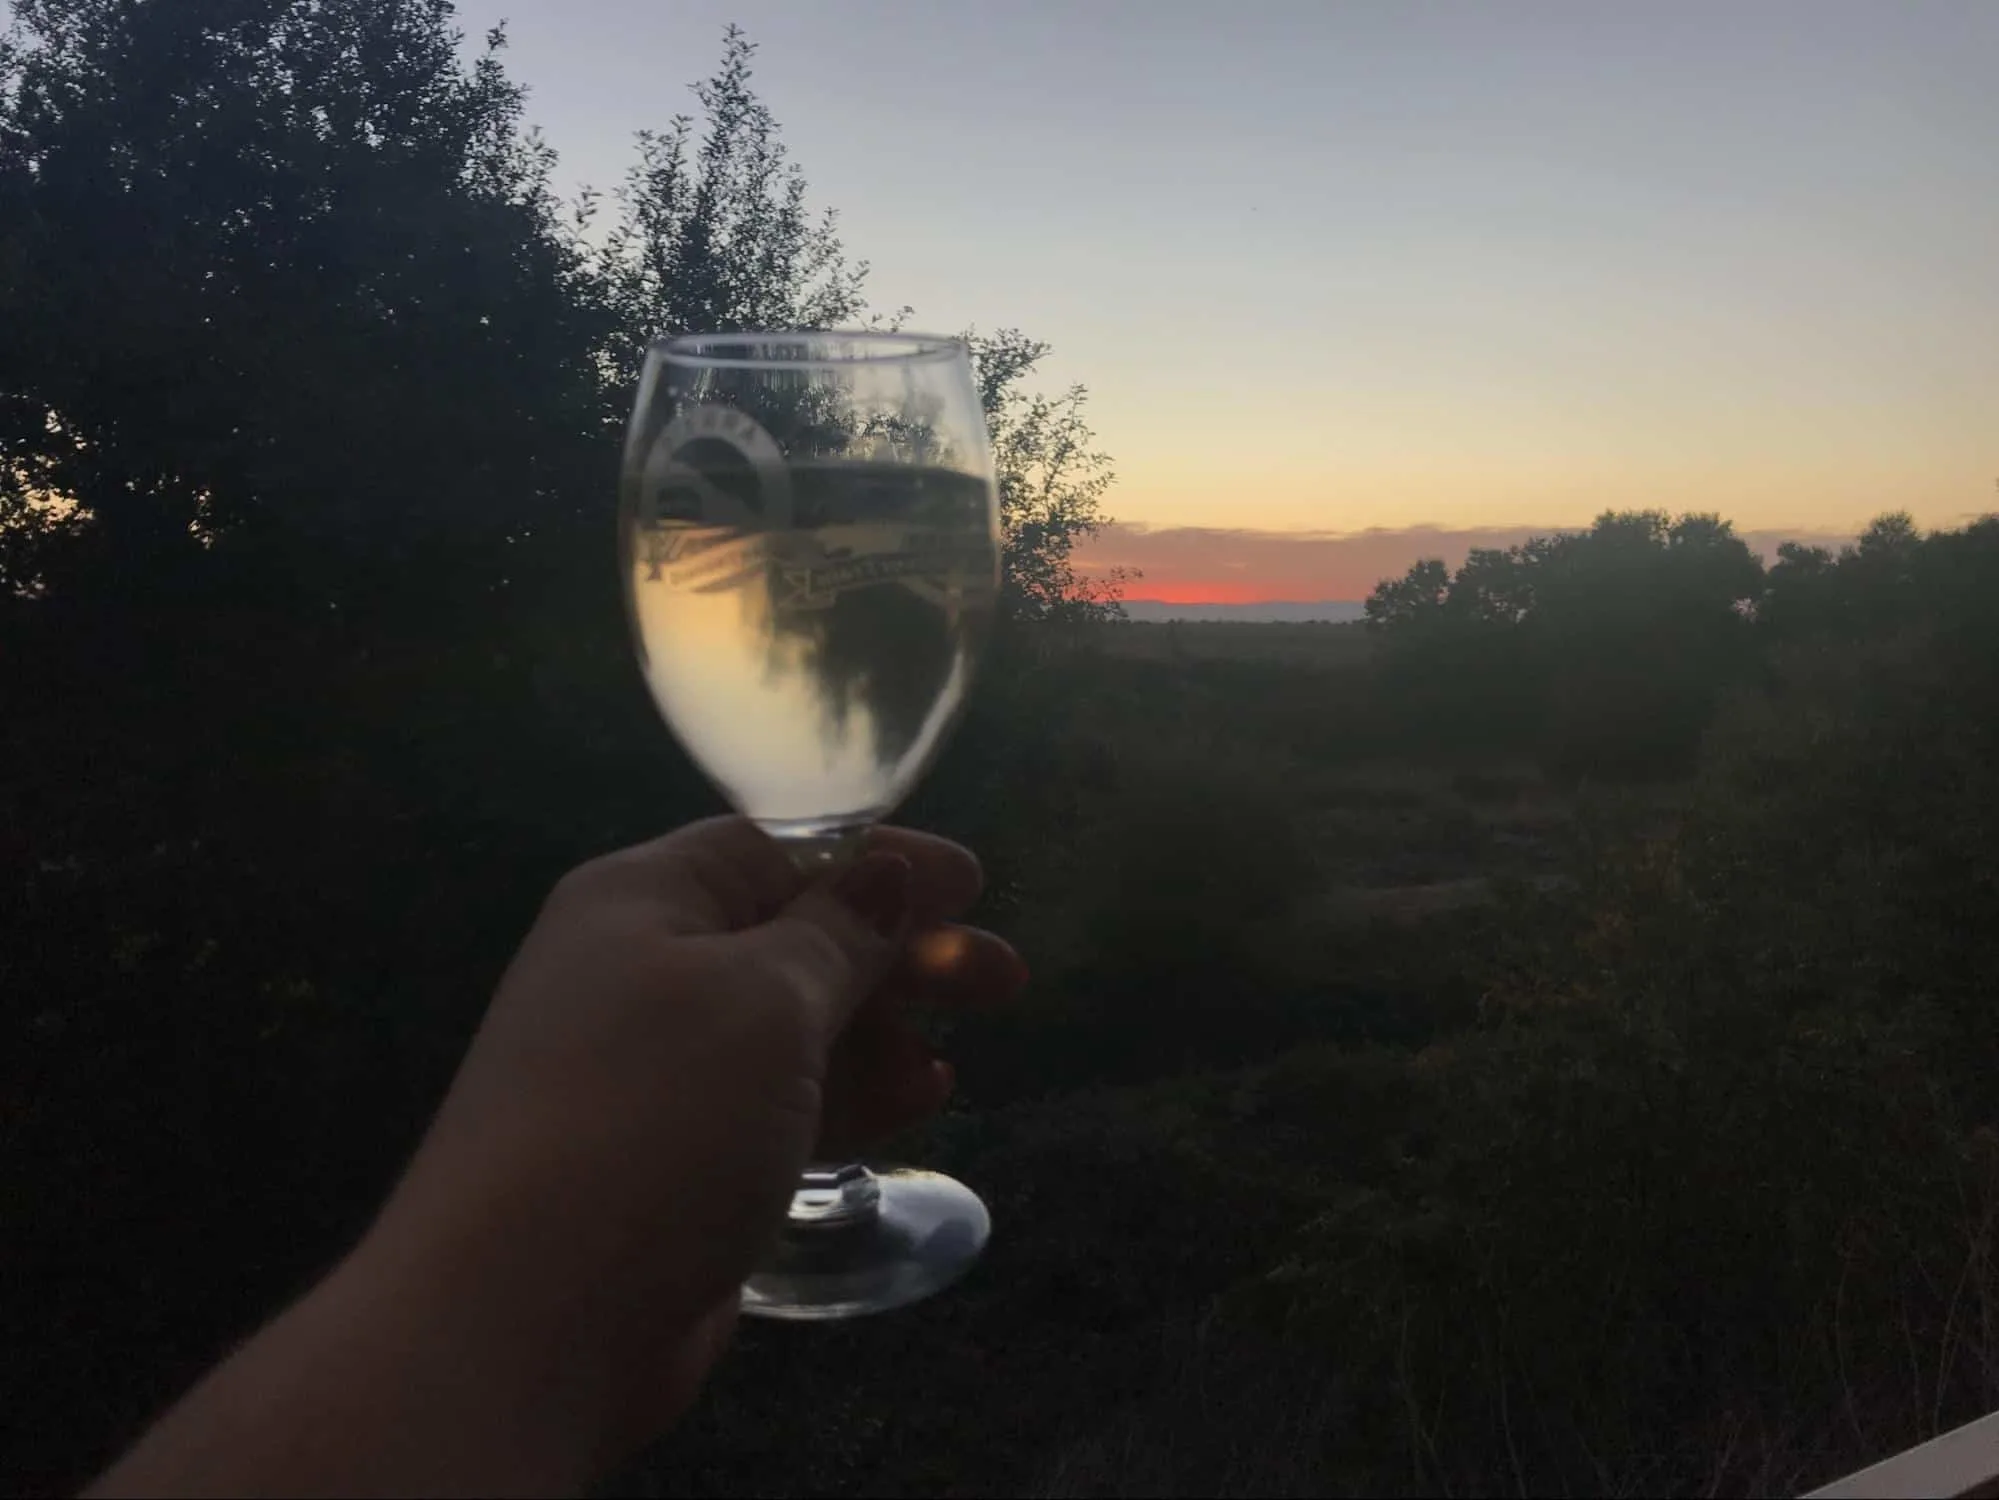 A glass of wine to toast a beautiful sunset.